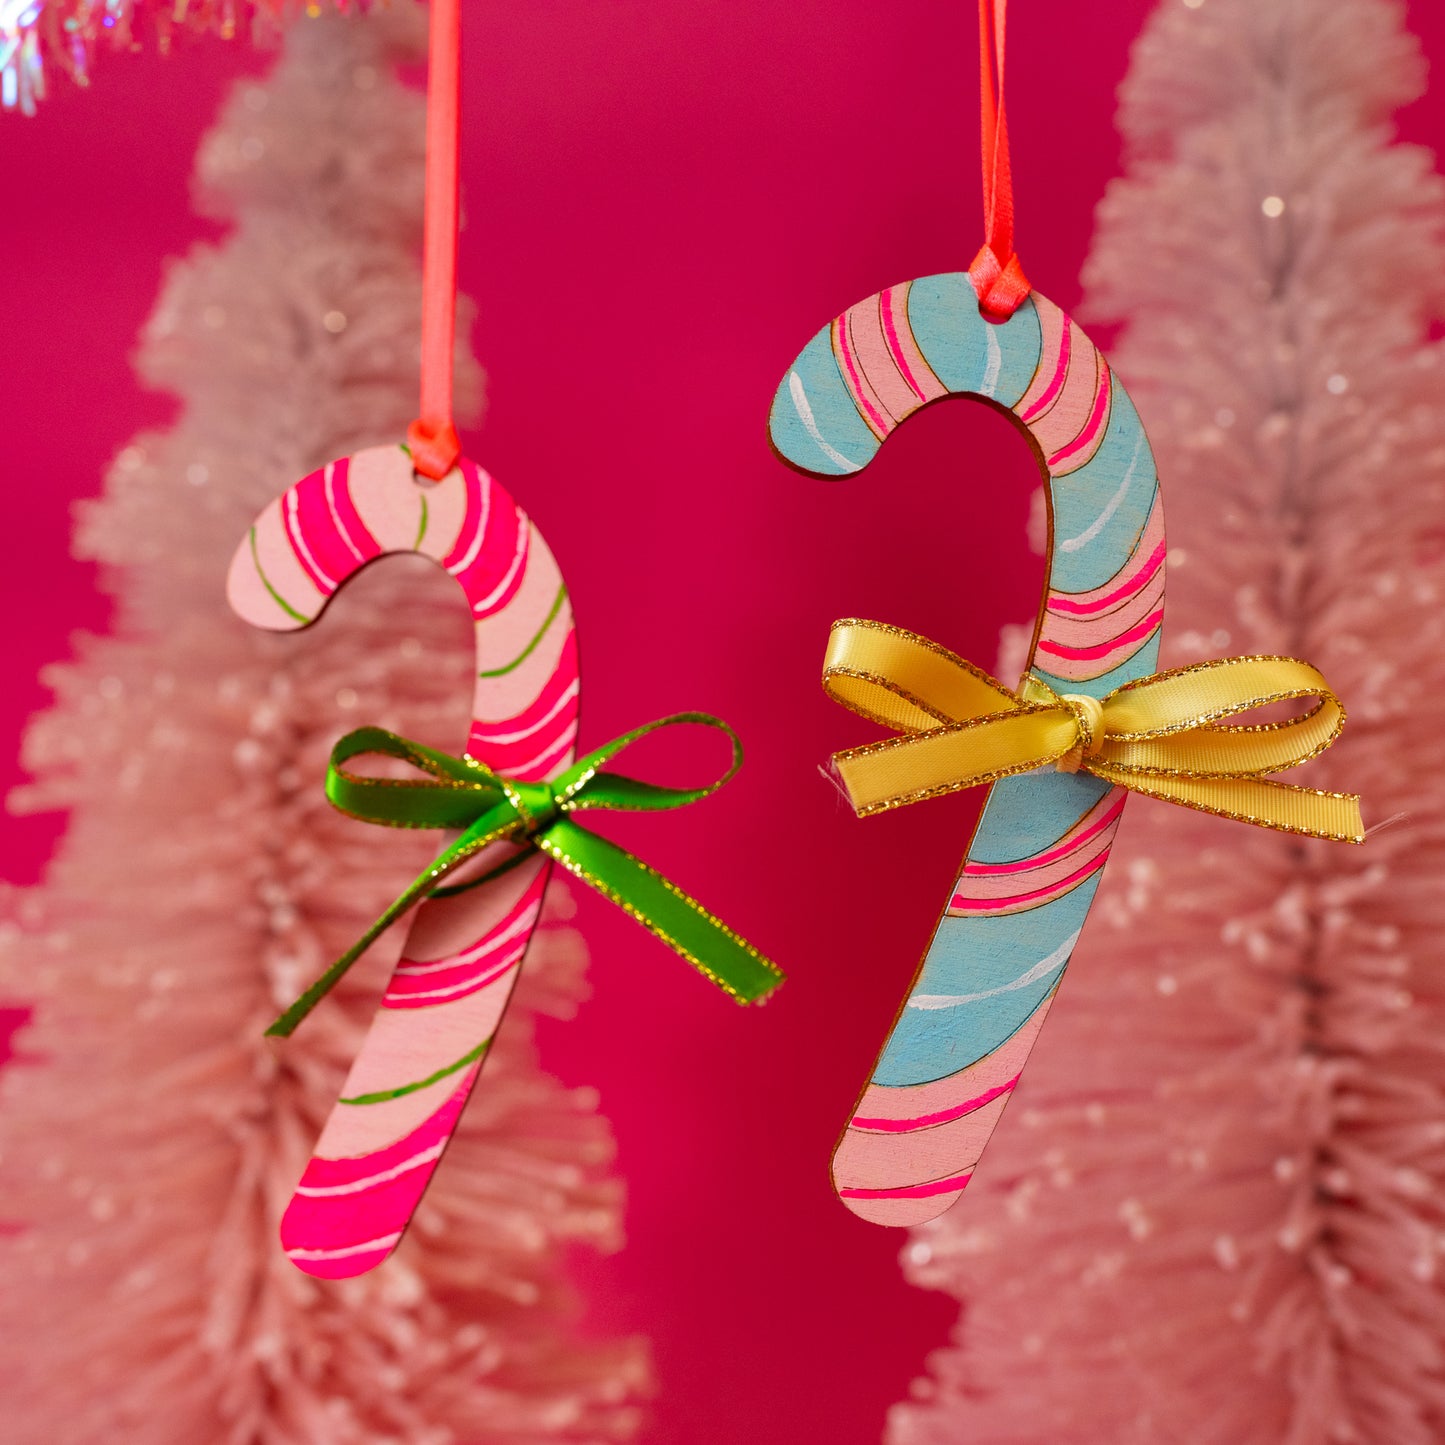 Wooden Candy Cane Ornament